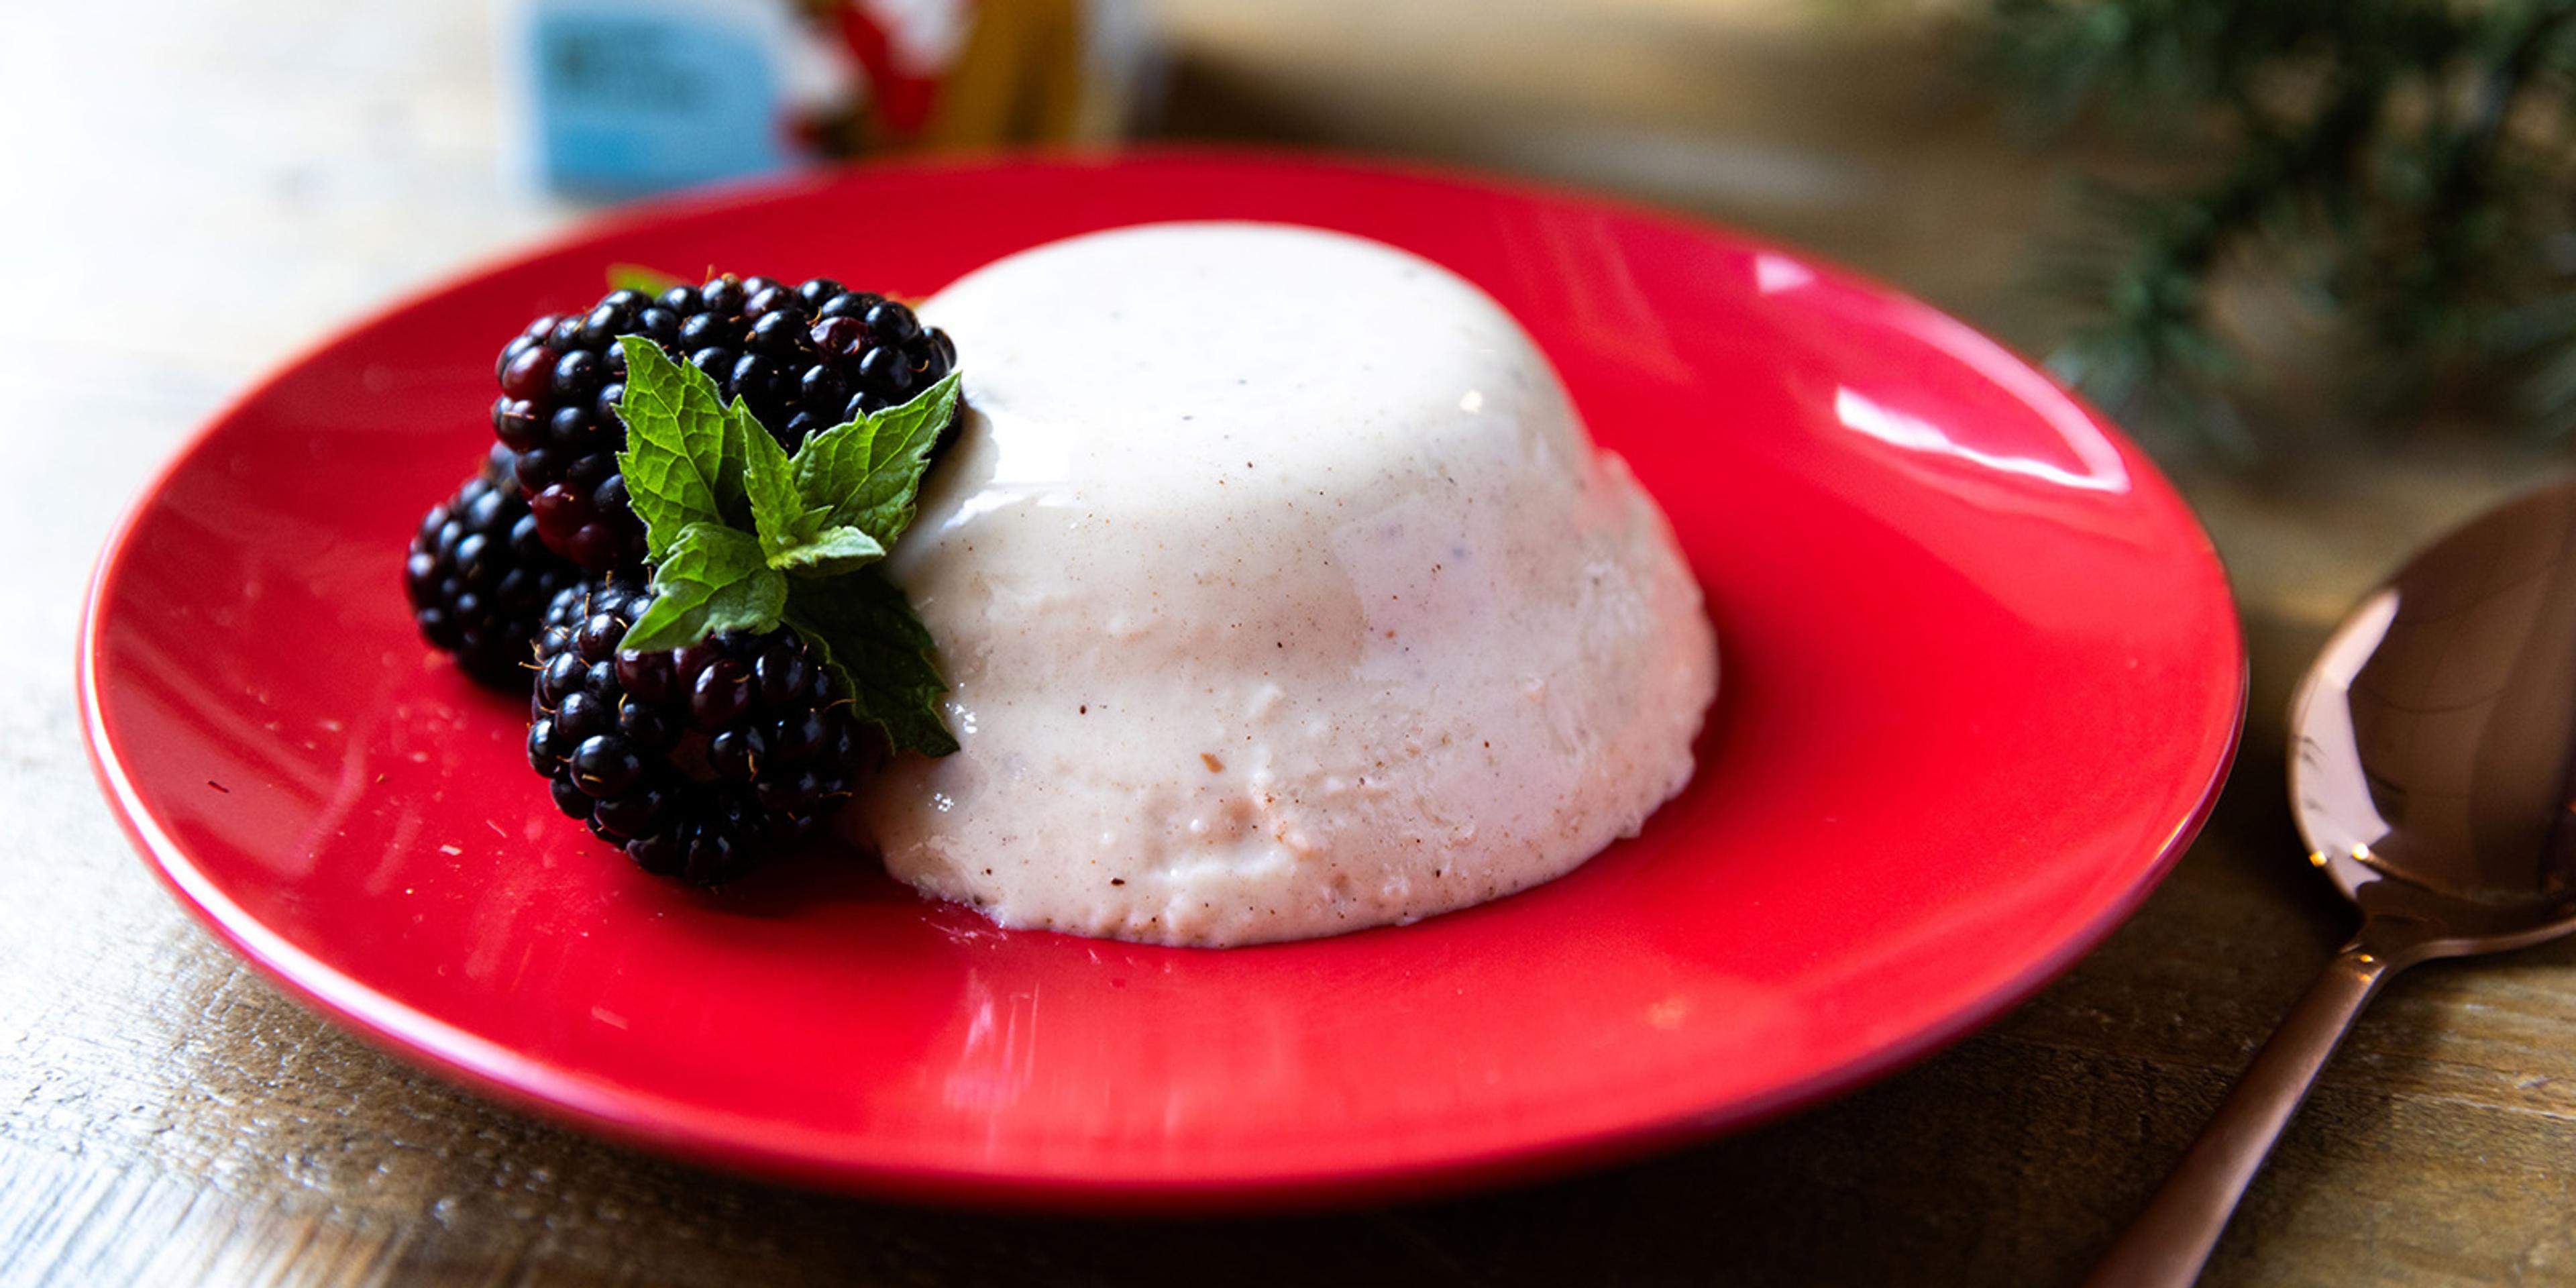 Panna Cotta made with Organic Valley Eggnog on a plate garnished with berries.